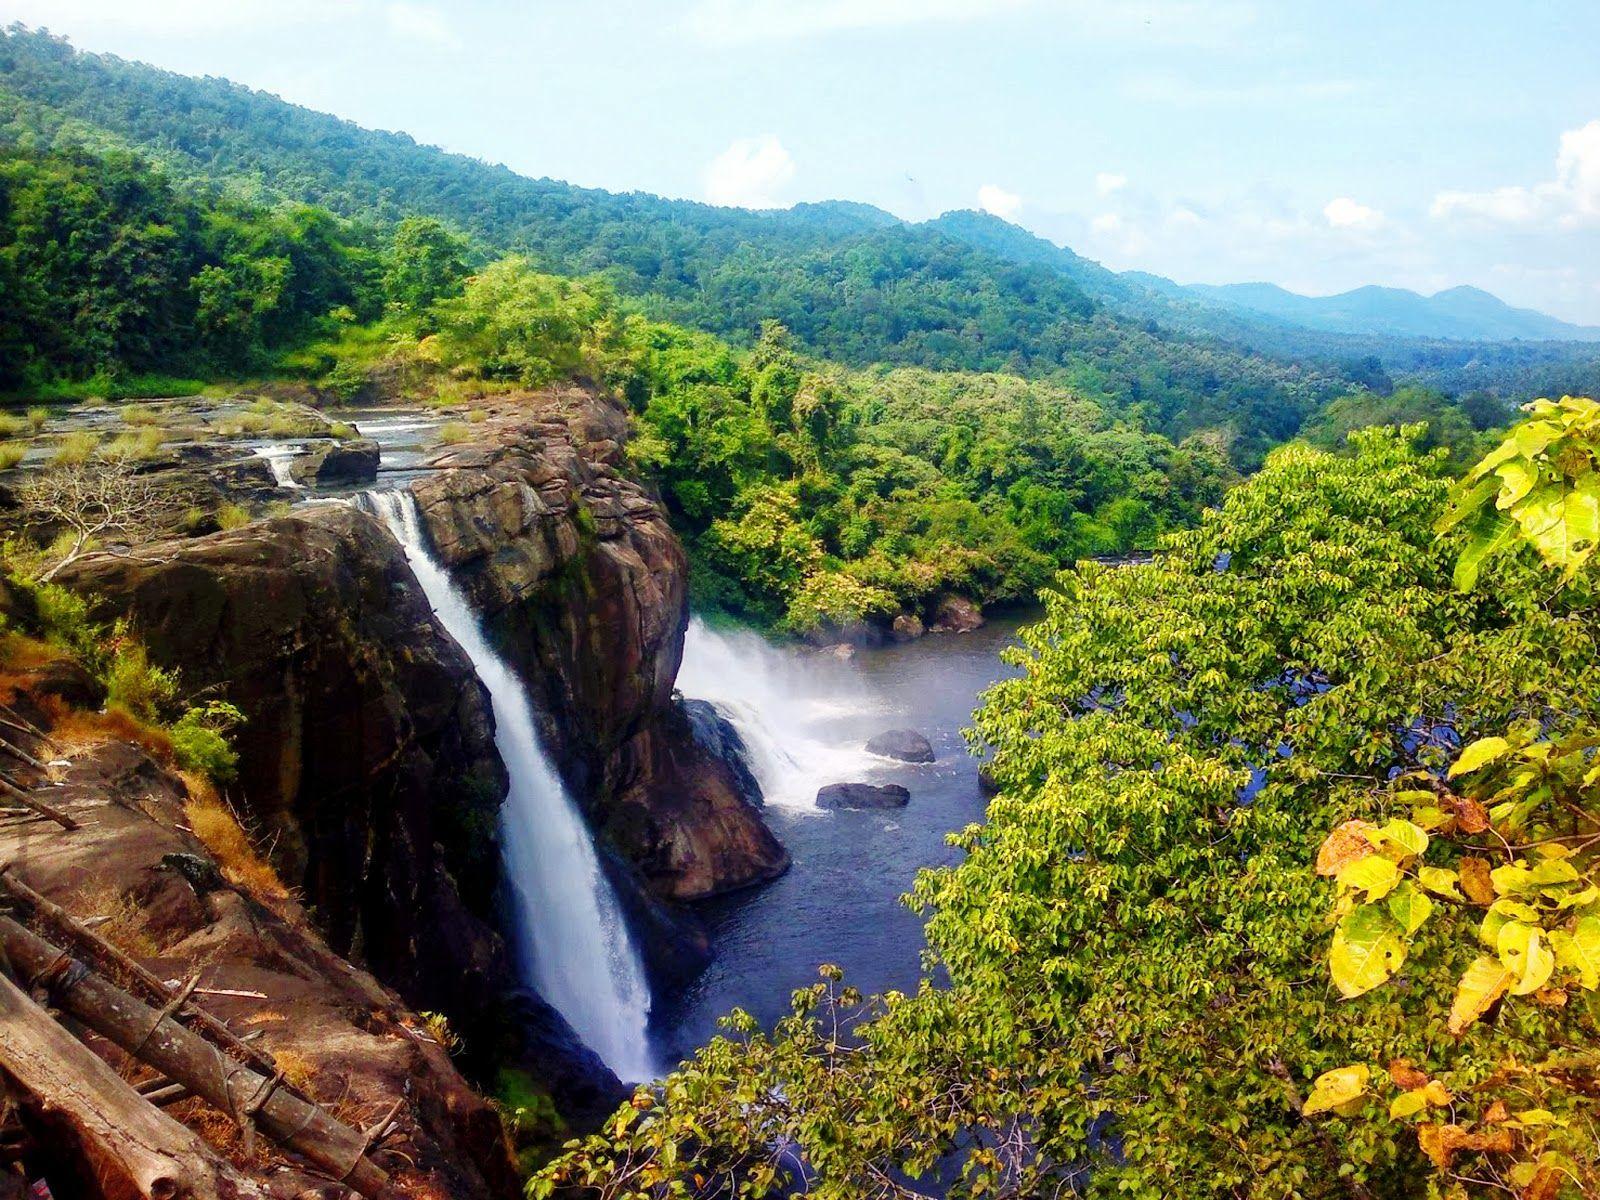 Athirappilly waterfall is the highest waterfall in Kerala